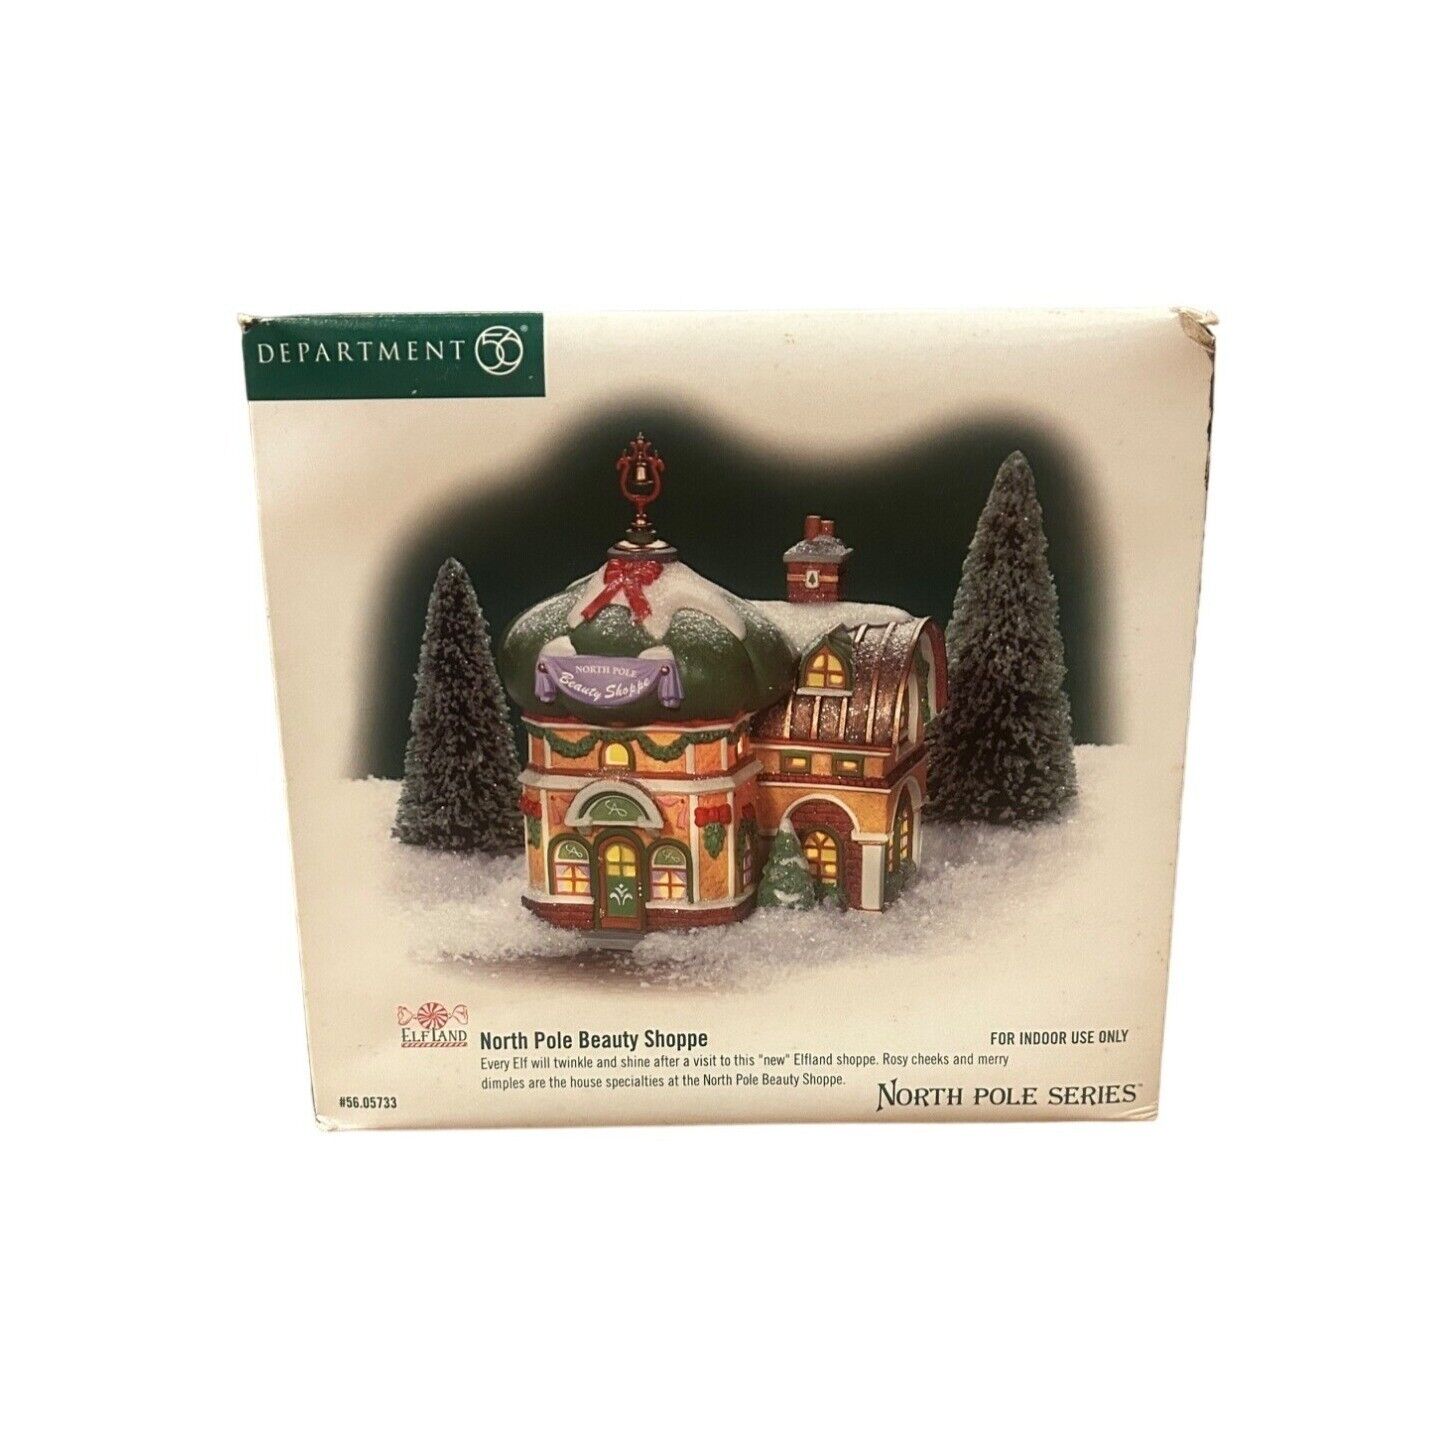 Department 56 Elf Land North Pole Series Beauty Shoppe 56-05733 Brand New in Box